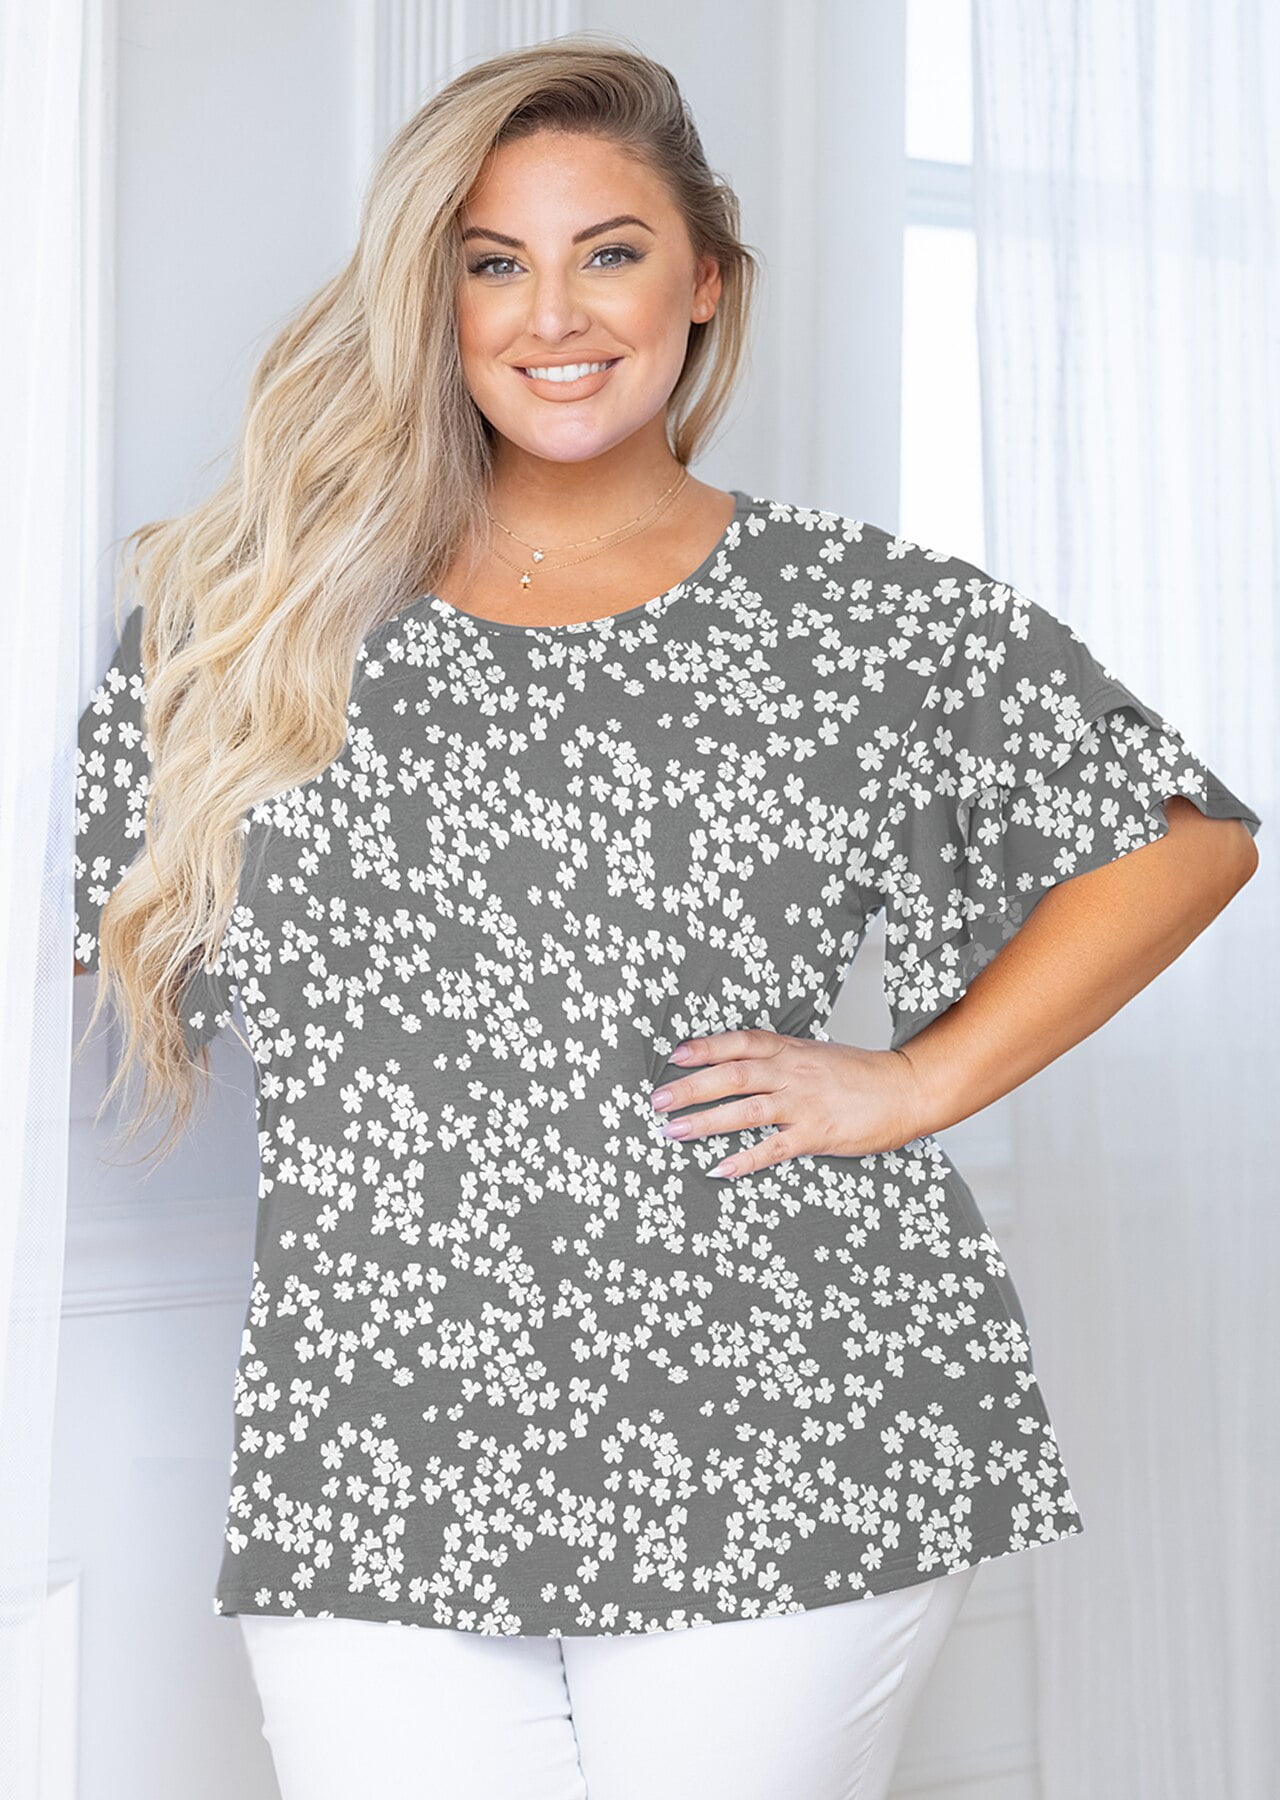 HSMQHJWE Plus Size Tunics Hot Maternity Women Solid Plus Size Tops Lace  Stitching Short Sleeve Tunic Tops To Wear With Leggings Summer Tops Retro